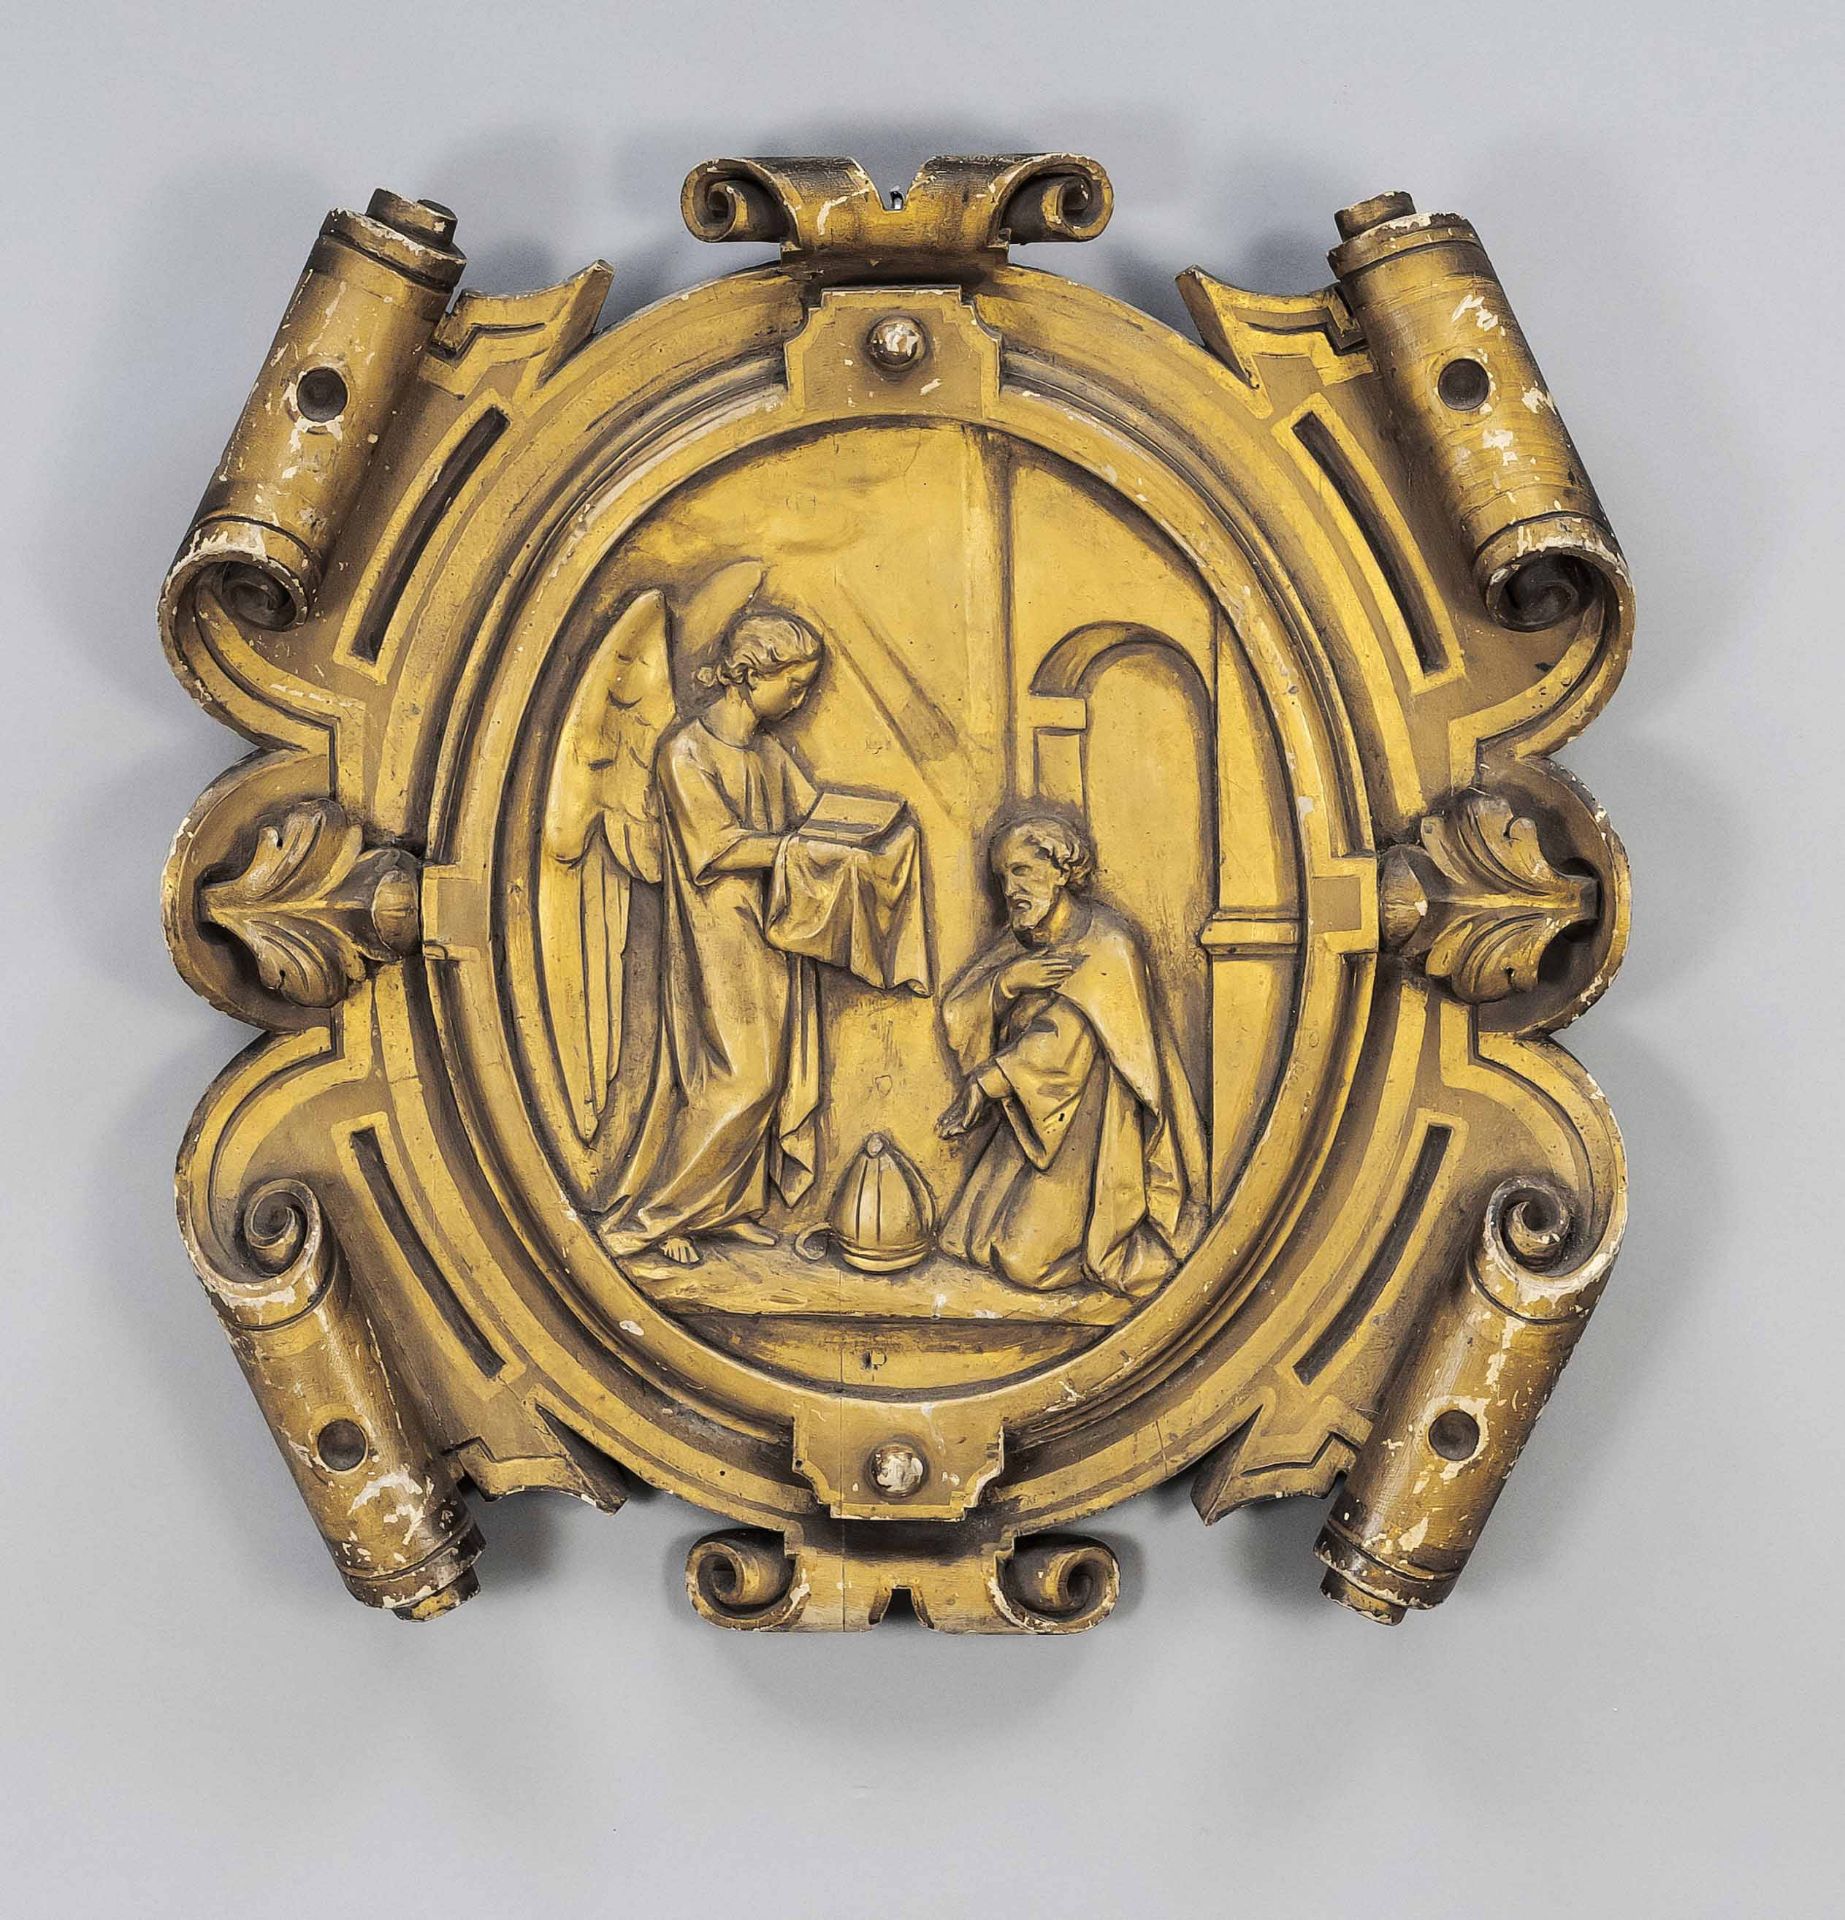 Religious relief, 19th c., wood, gilded. Scene with angel and kneeling in a church architecture,